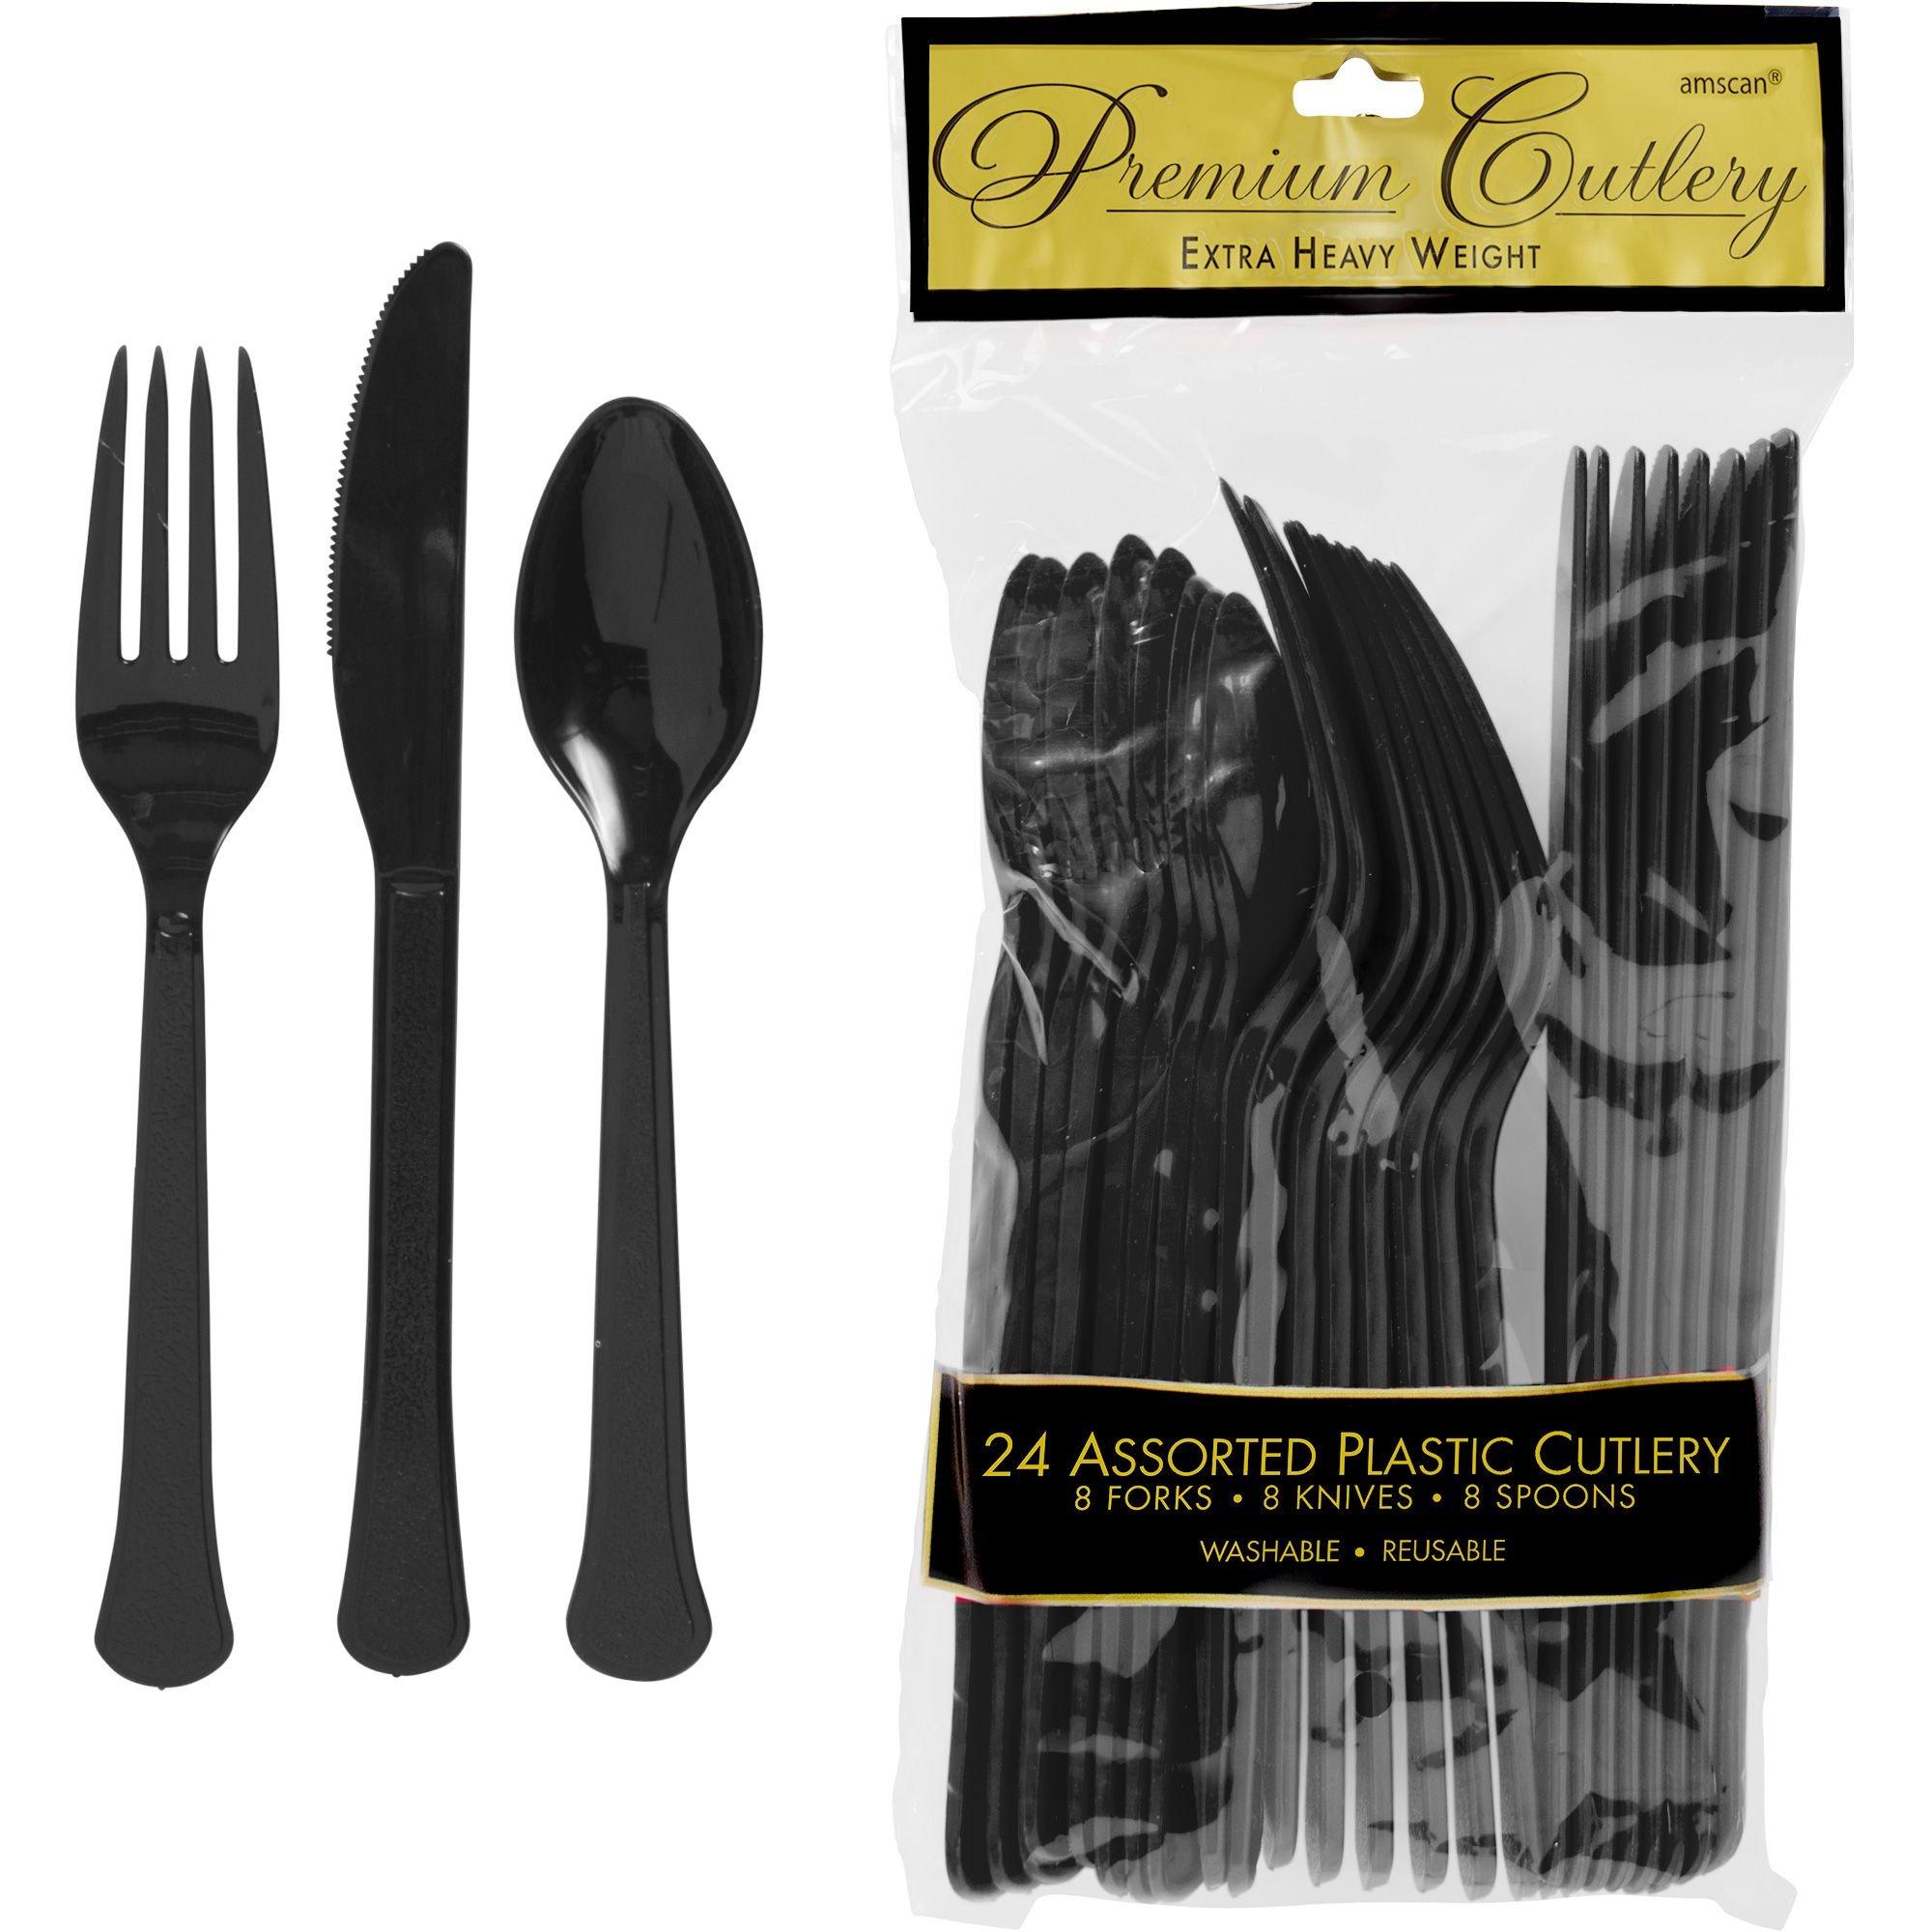 24CT CLEAR FORK CUTLERY IN BOX-24